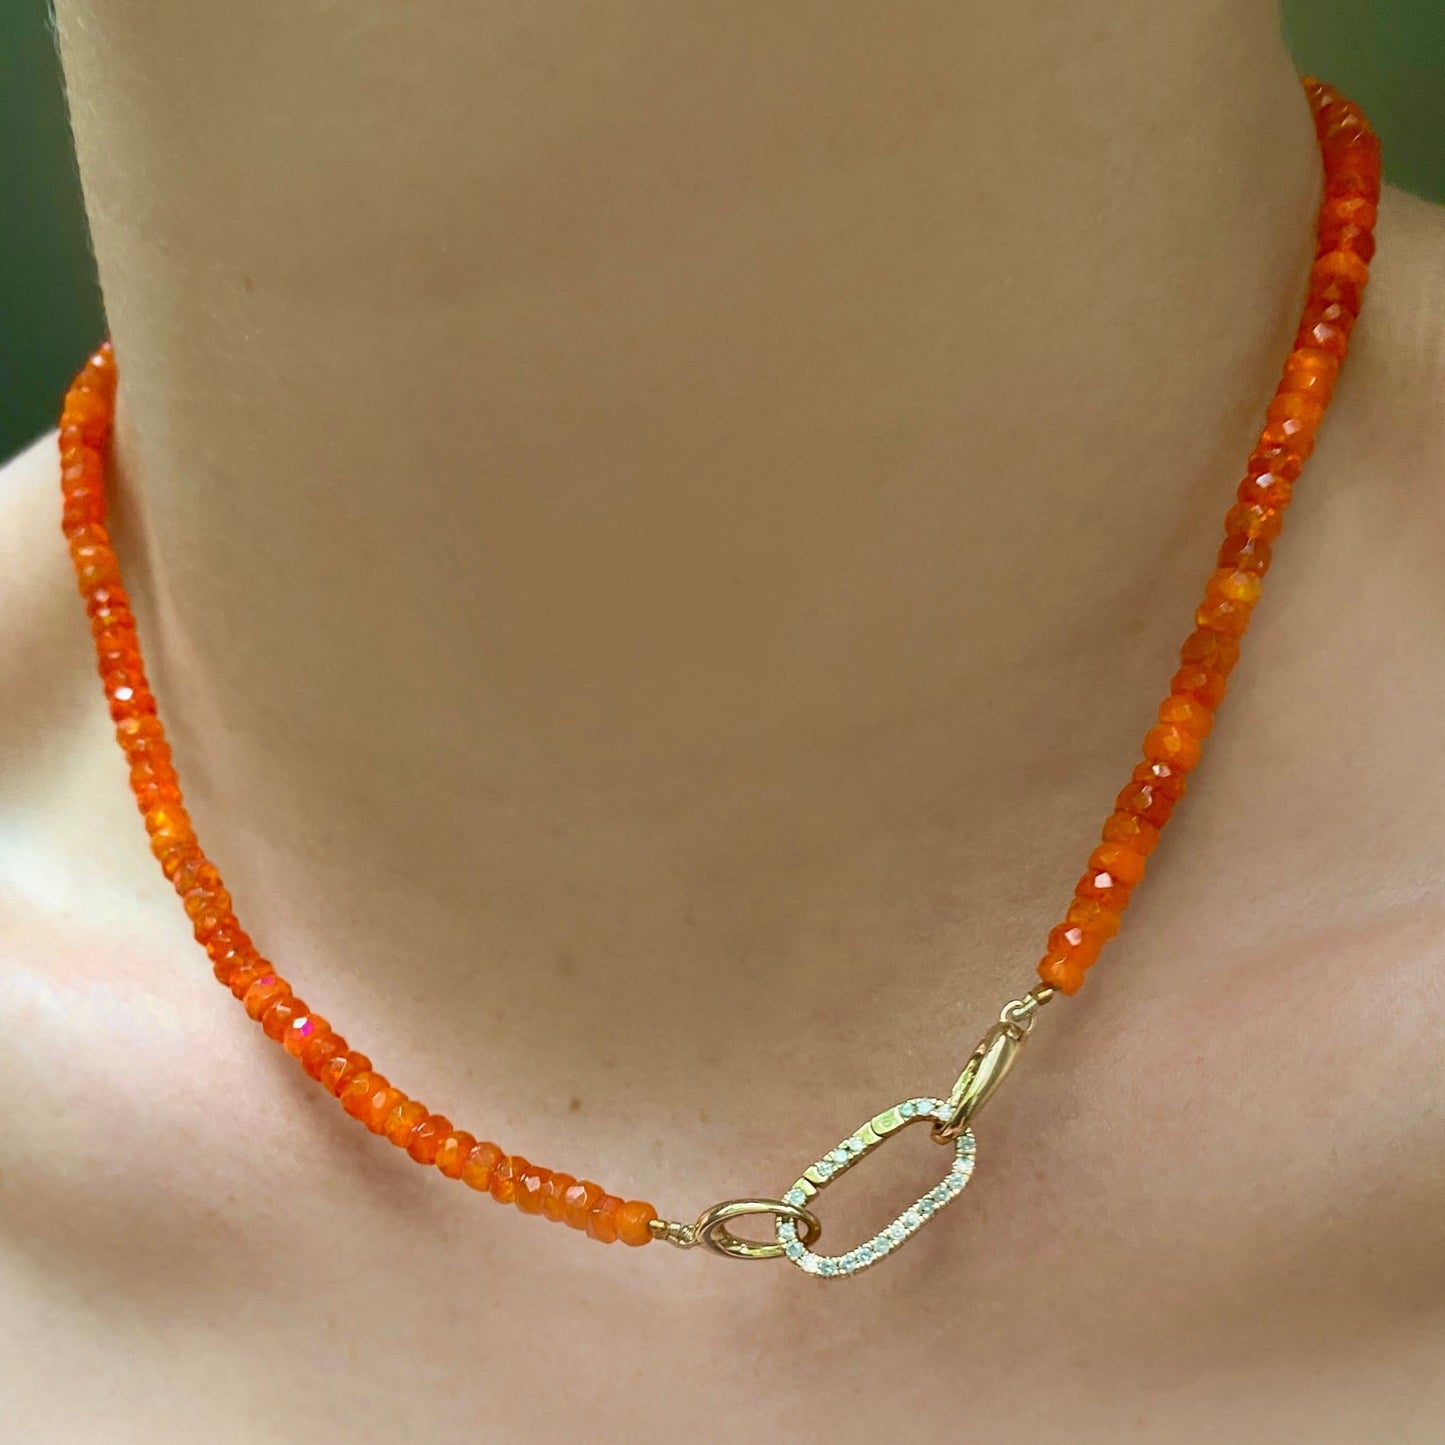 Shimmering beaded necklace made of faceted opals in shades of orange on a gold linking ovals clasp. Styled on a neck layered with a medium pave face charm lock.